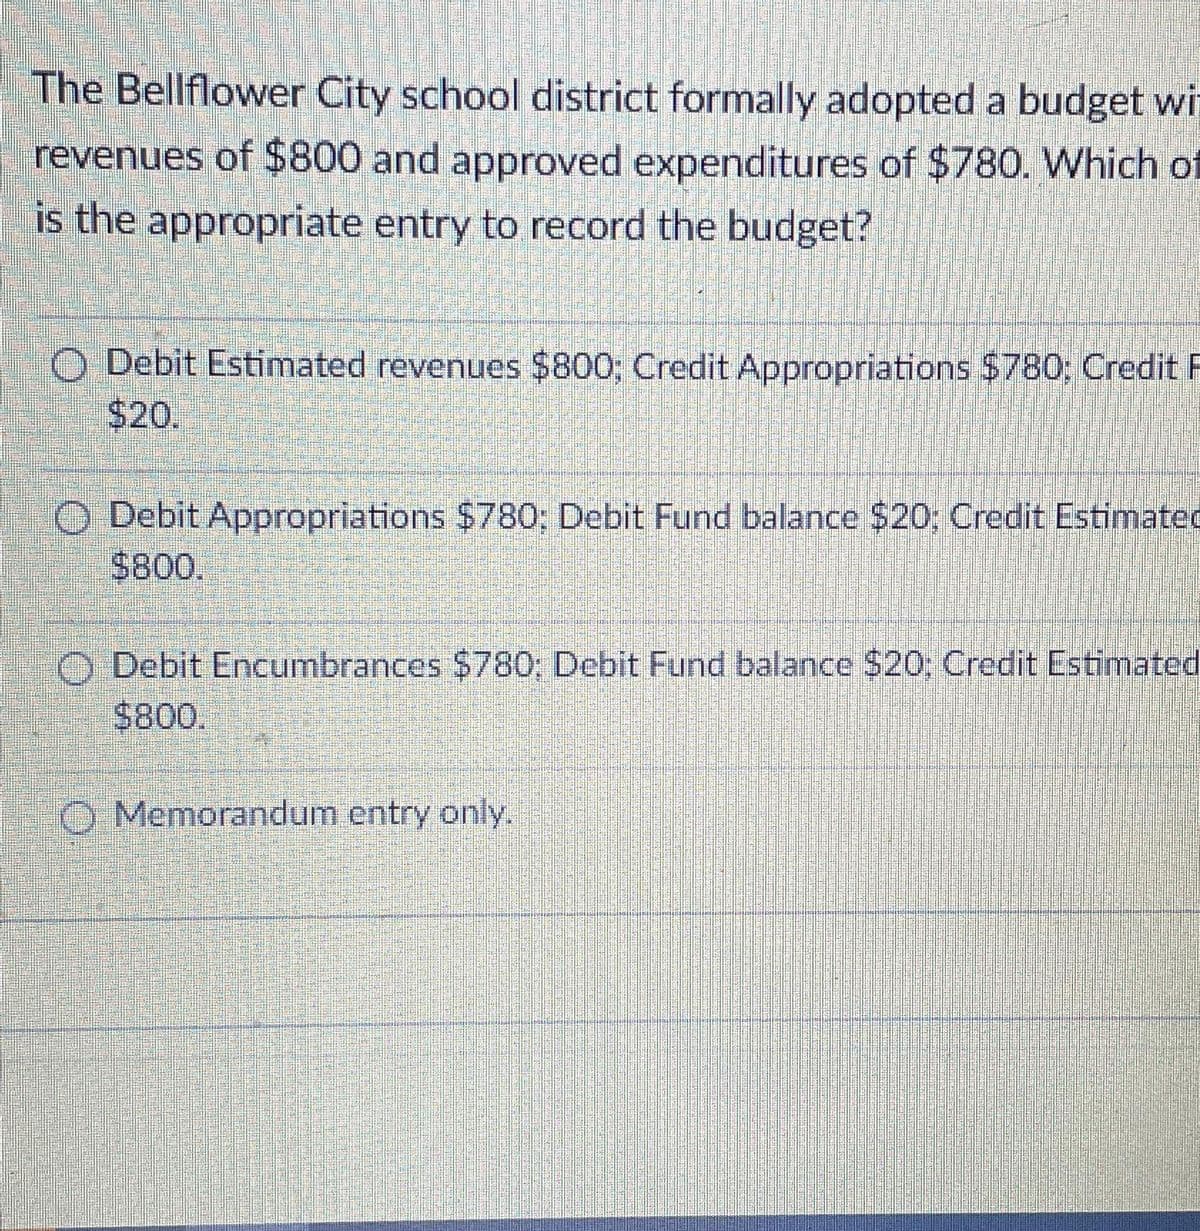 The Bellflower City school district formally adopted a budget wi
revenues of $800 and approved expenditures of $780. Which of
is the appropriate entry to record the budget?
MATER
OLARA
O Debit Estimated revenues $800; Credit Appropriations $780; Credit F
$20.
EFERE
Debit Appropriations $780: Debit Fund balance $20: Credit Estimated
$800.
Debit Encumbrances $780: Debit Fund balance $20; Credit Estimated
$800.
Memorandum entry only.